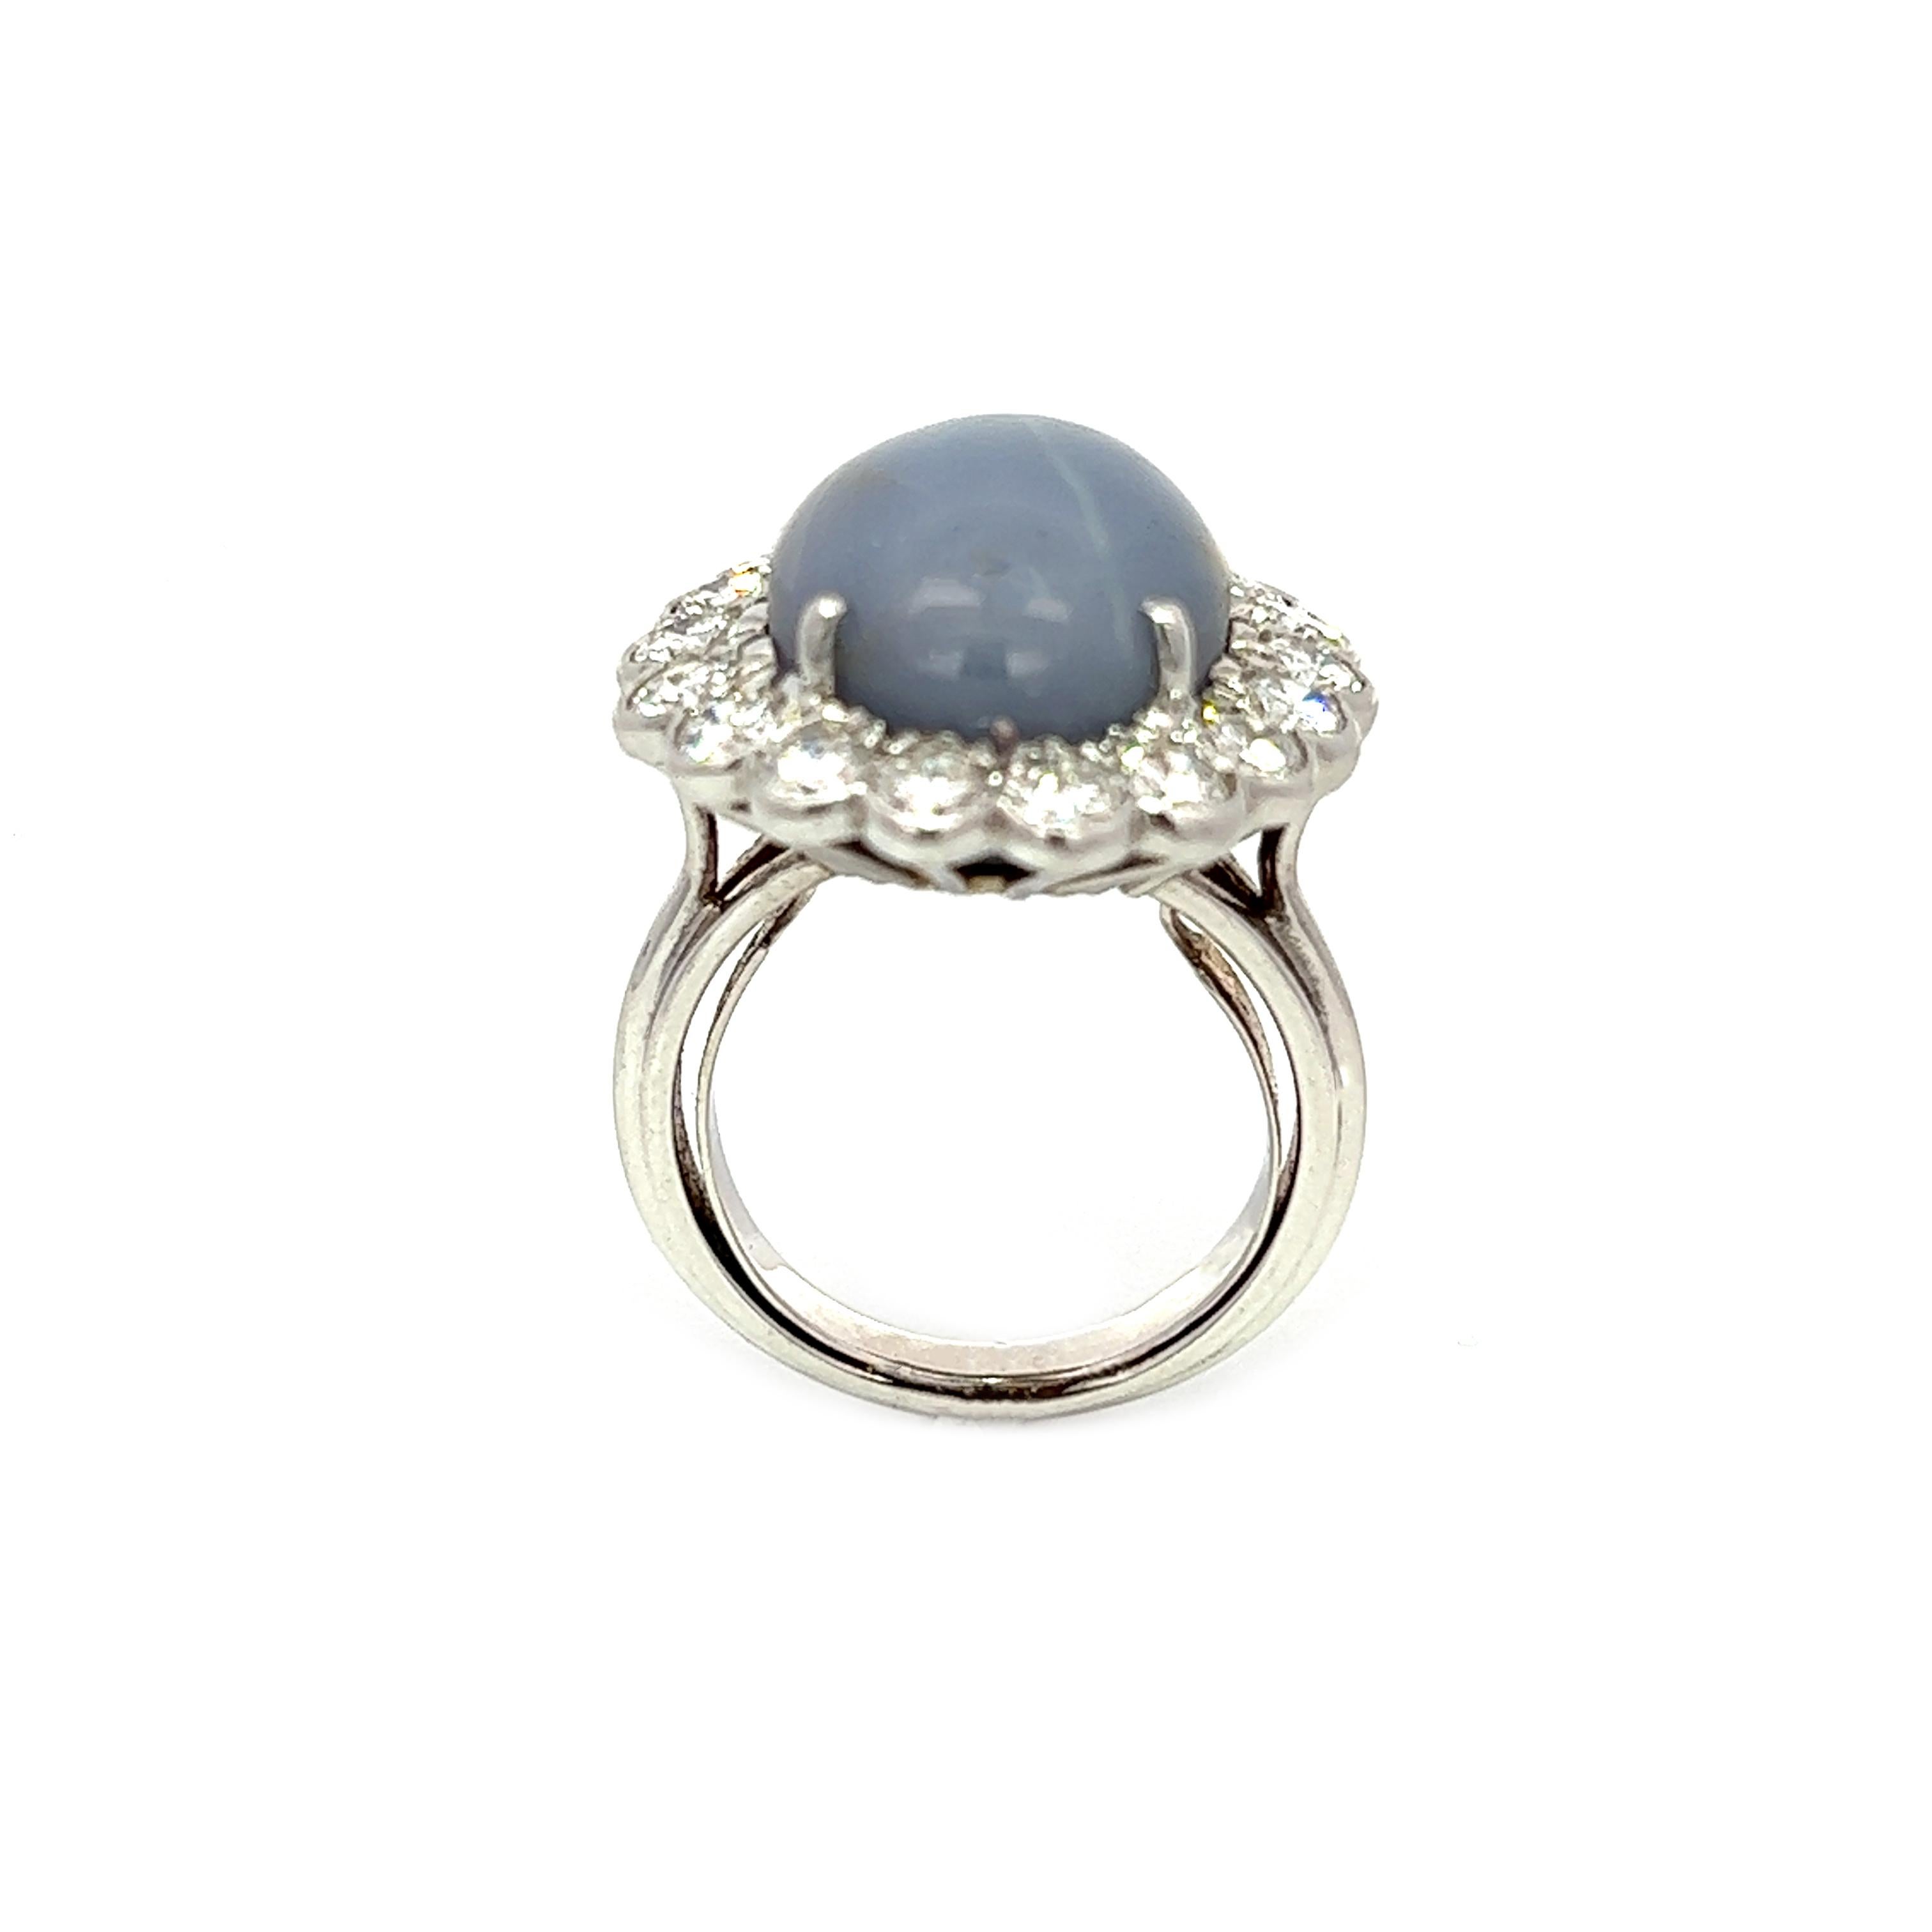 This exquisite ring boasts a 9.32CT star sapphire that reflects a stunning star pattern under certain lighting conditions, as shown in some of the images. The sapphire is encircled by 18 diamonds with an H color and VS clarity, weighing a total of